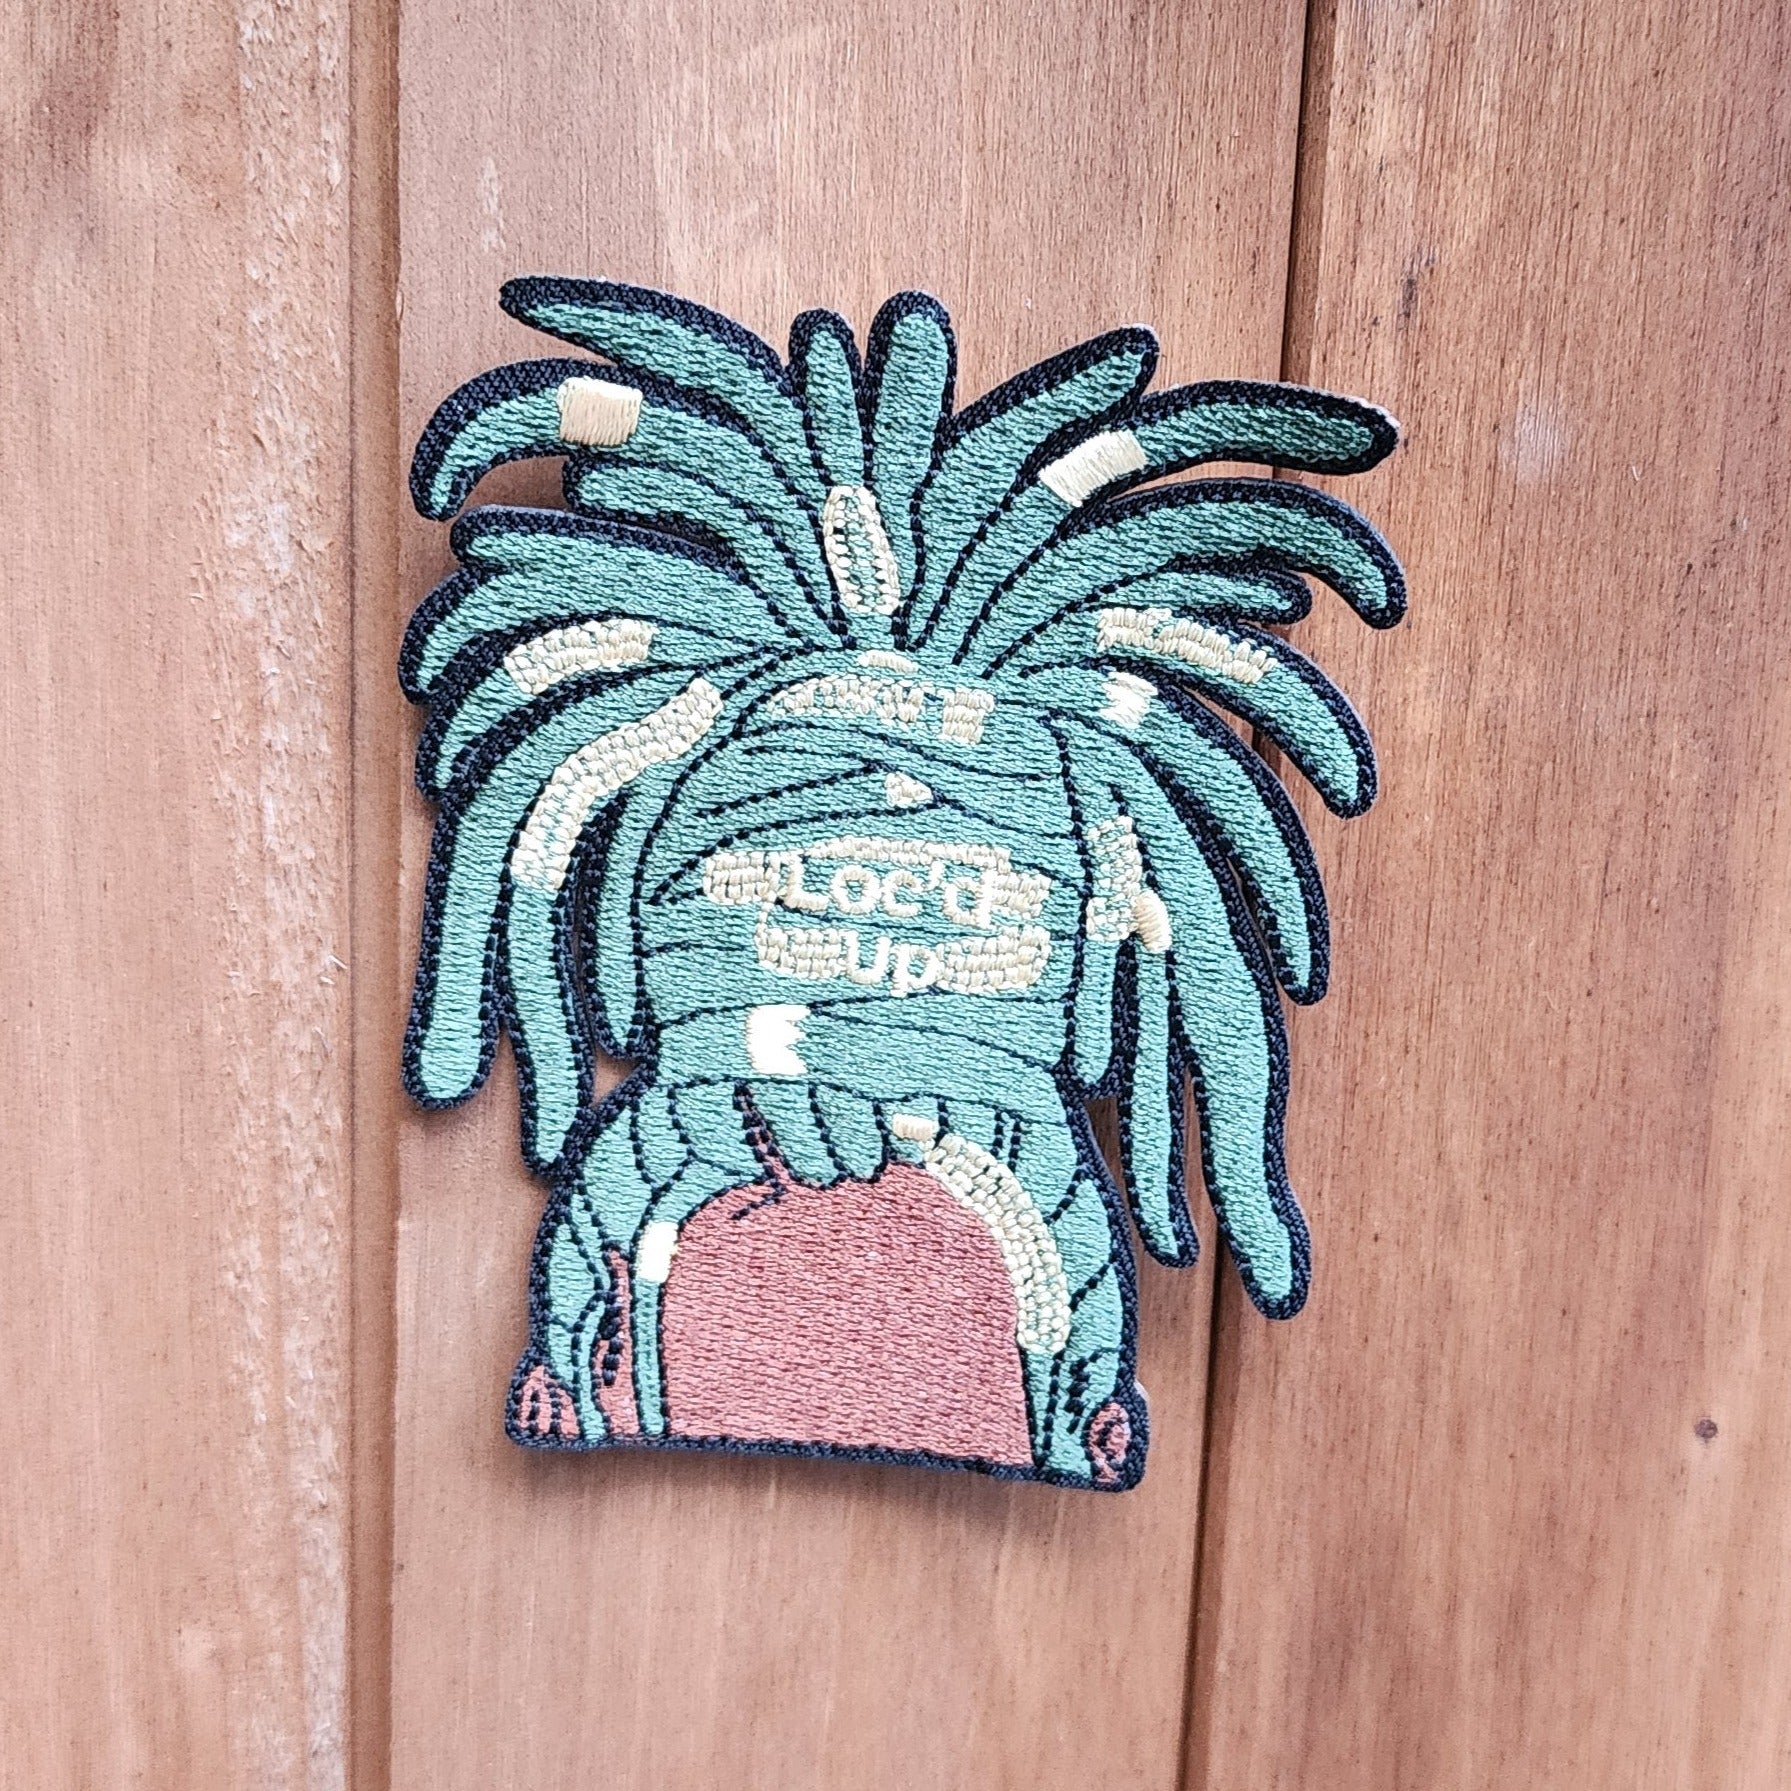 Natural hair locs patch sew on iron Patch [4x3.5 inches